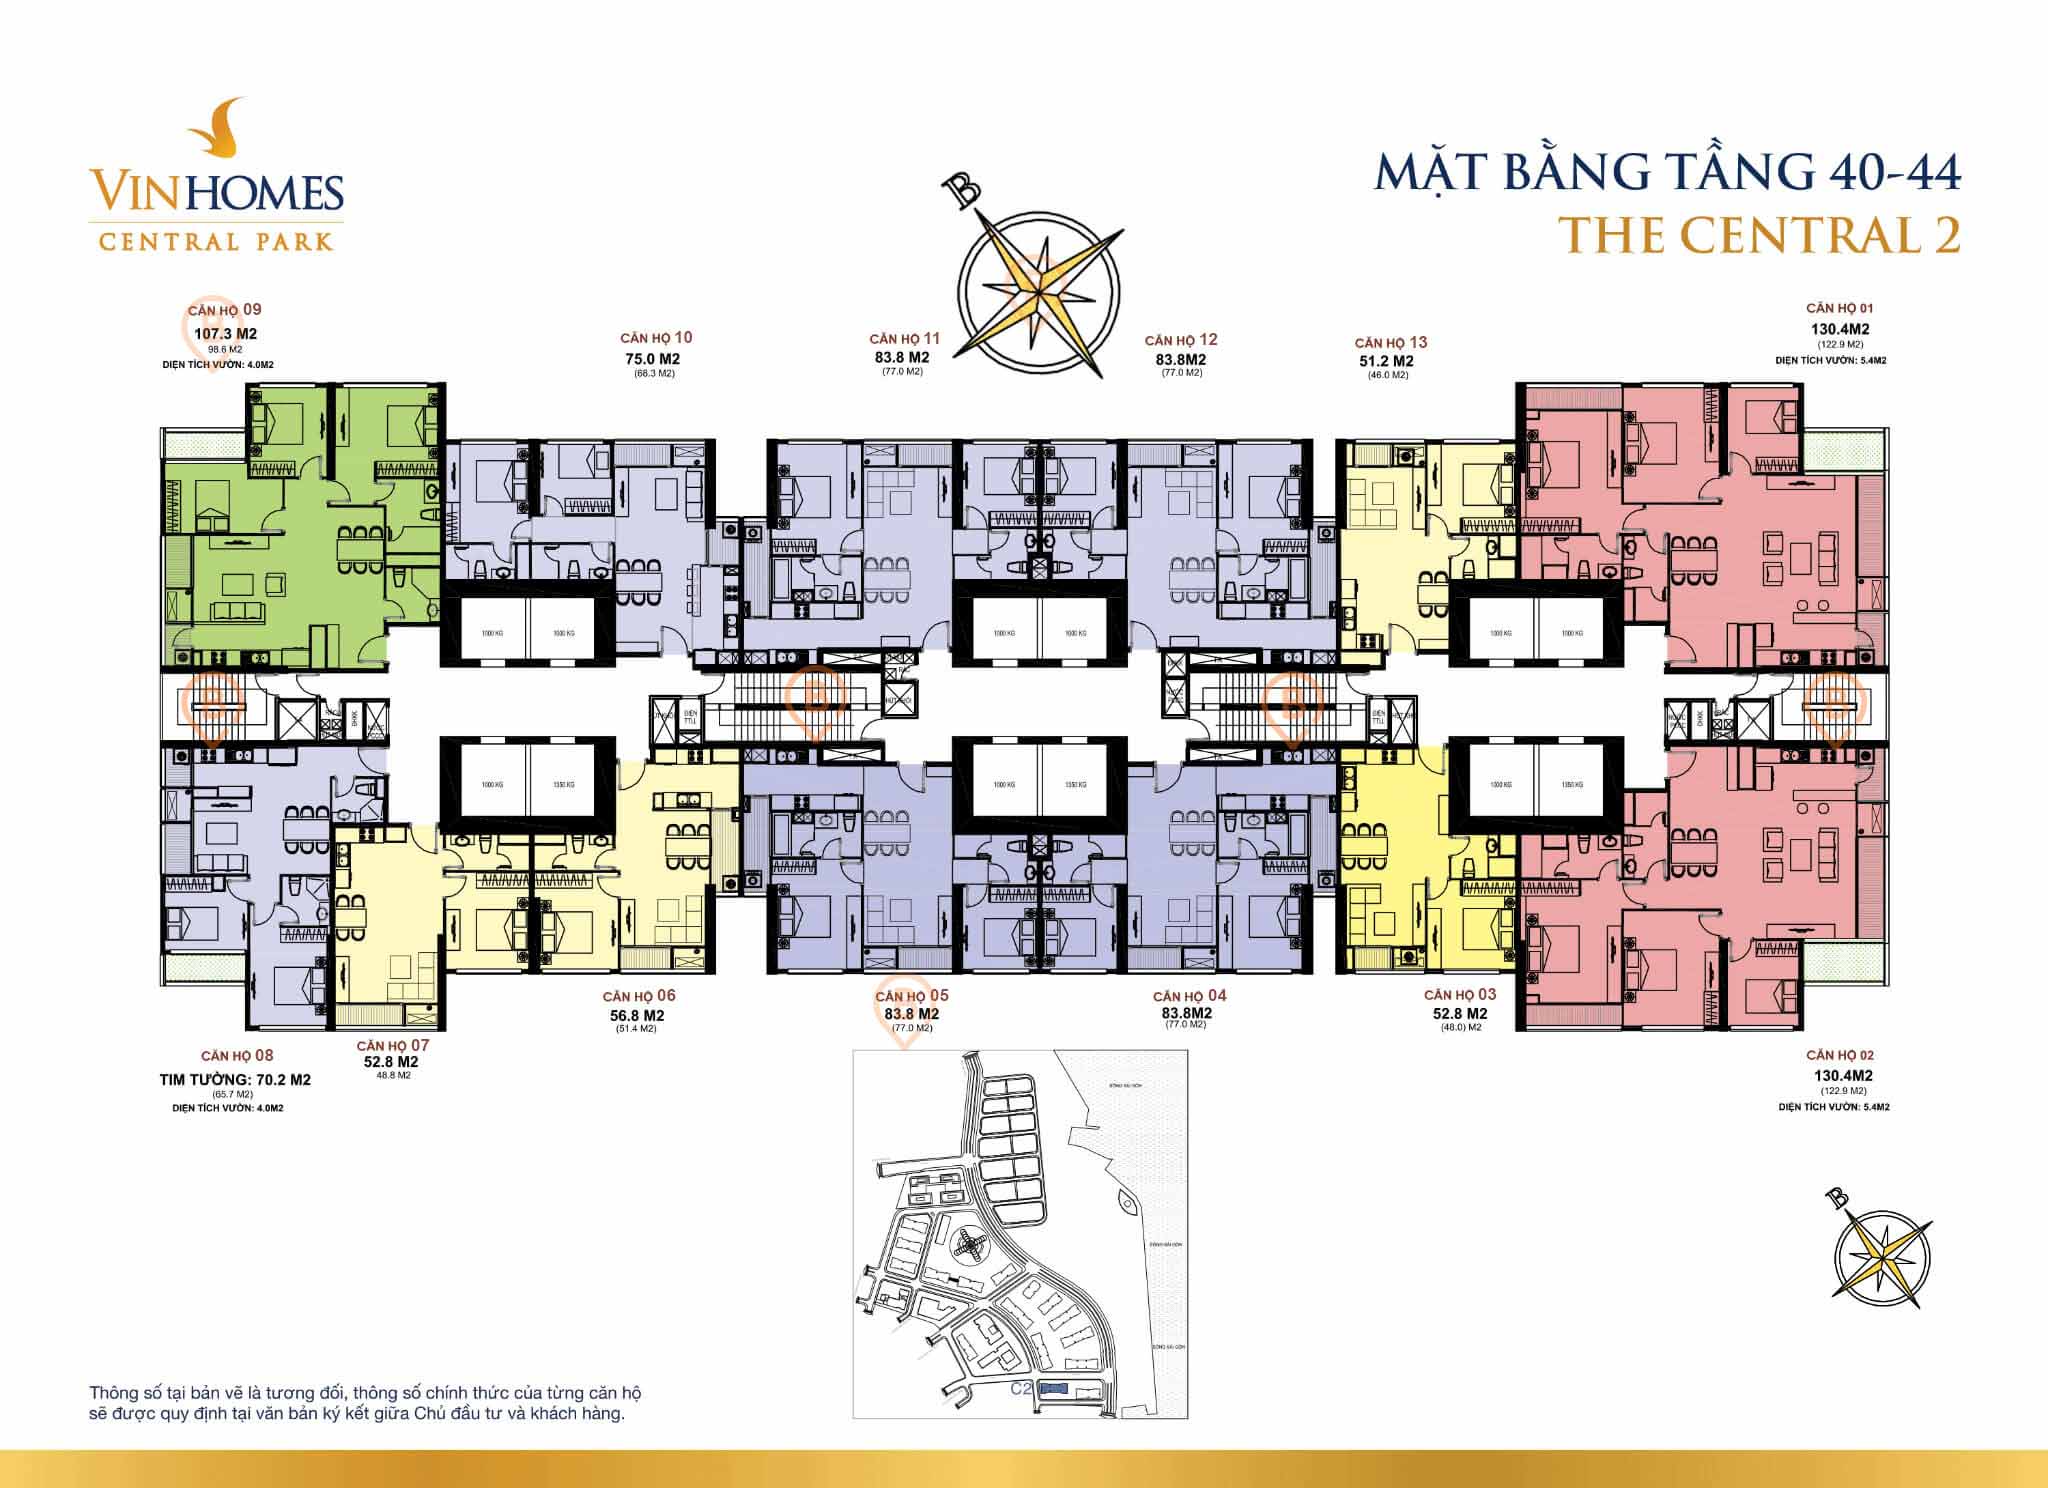 Mặt bằng layout tòa The Central 2 tầng 40-44 tại Vinhomes Central Park